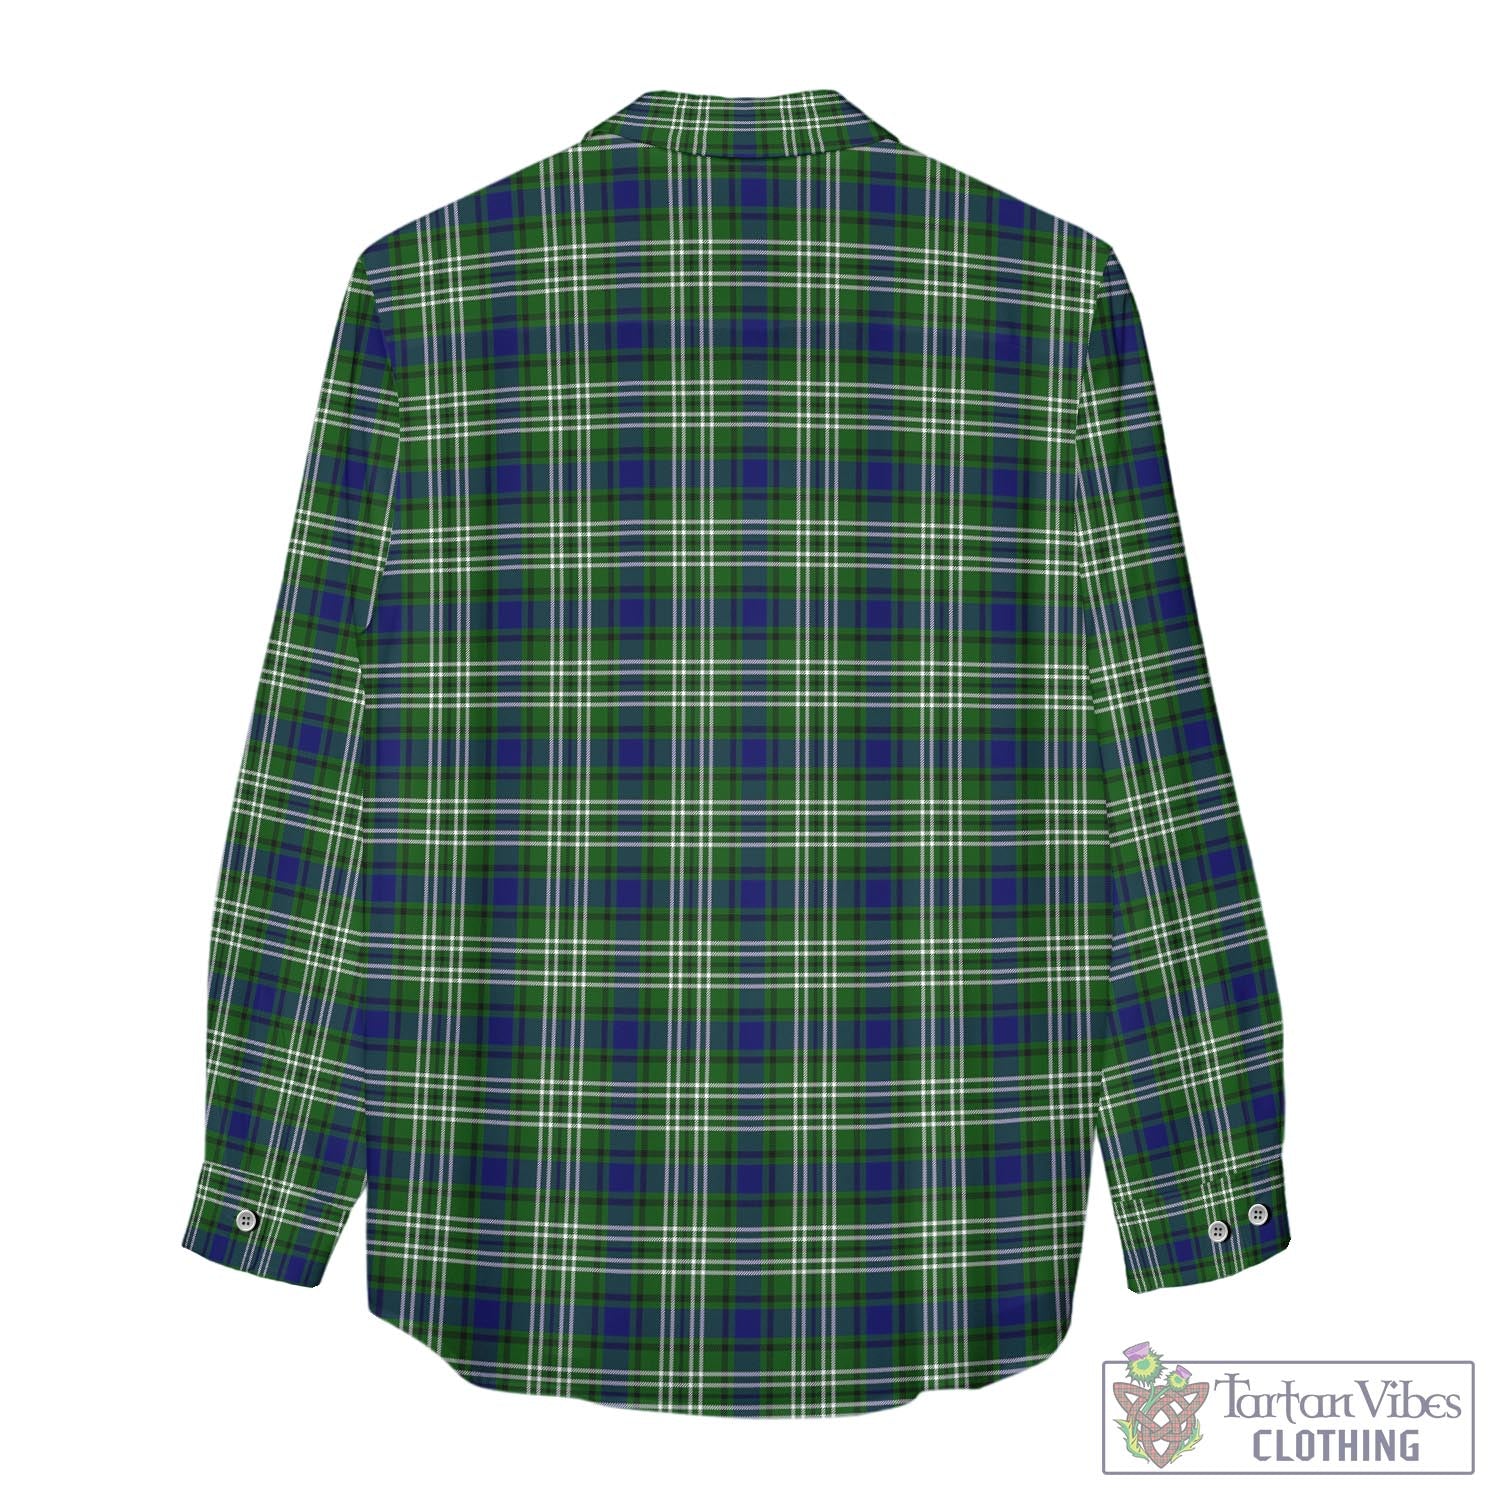 Tartan Vibes Clothing Mow Tartan Womens Casual Shirt with Family Crest